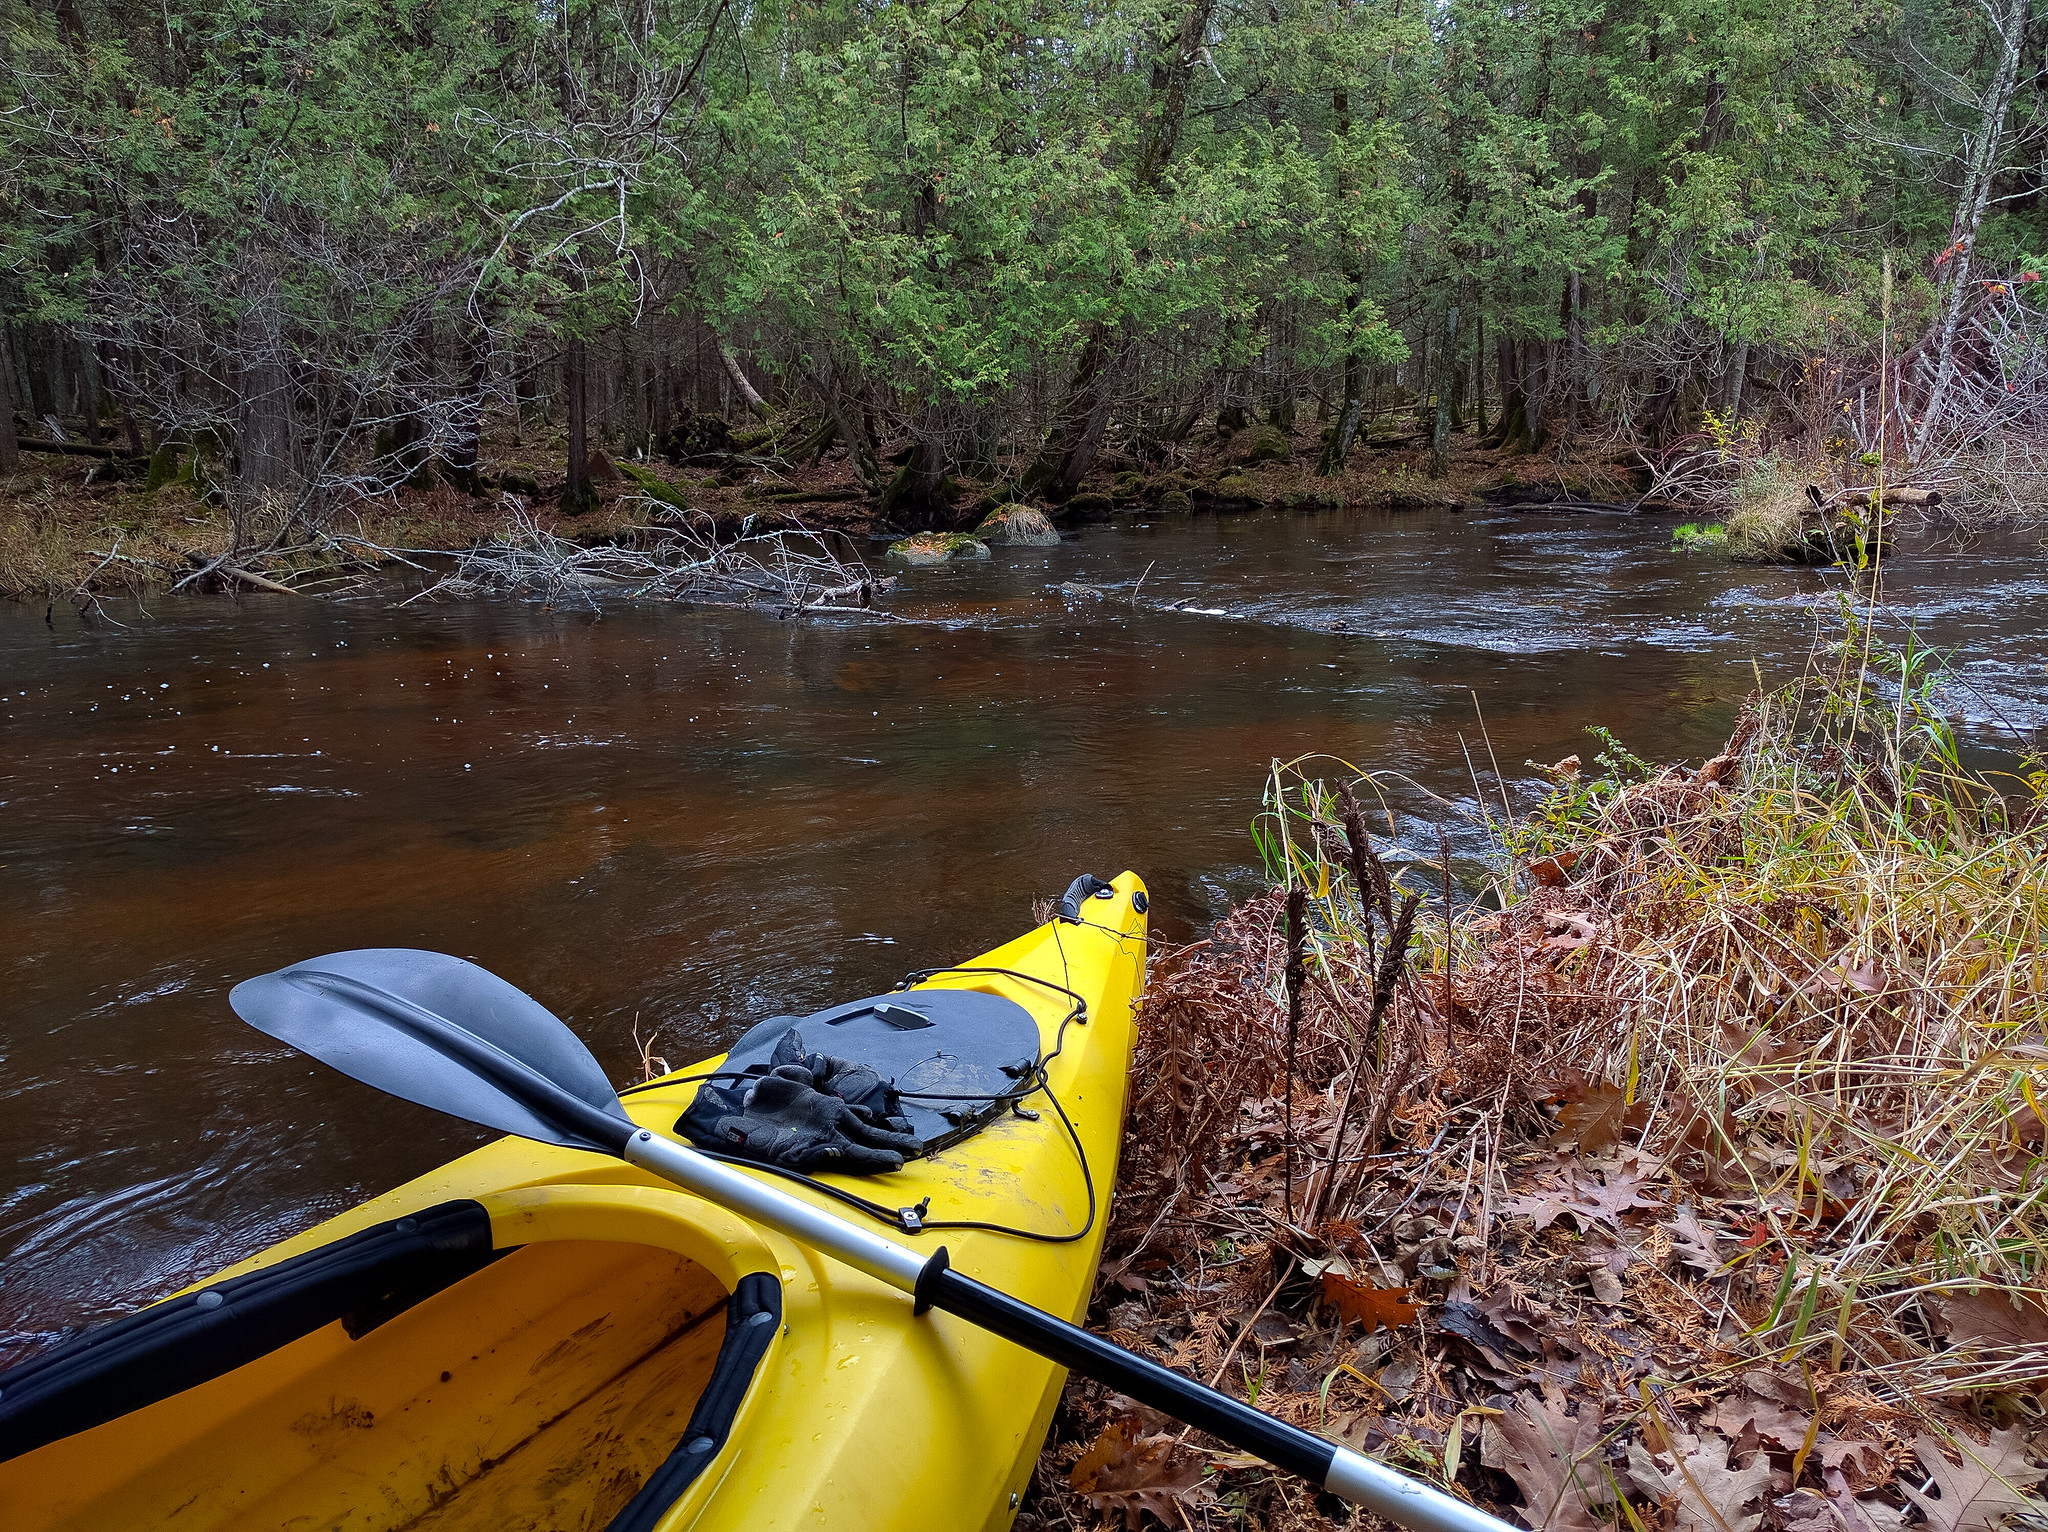 kayak on the wooded shoreline of a river